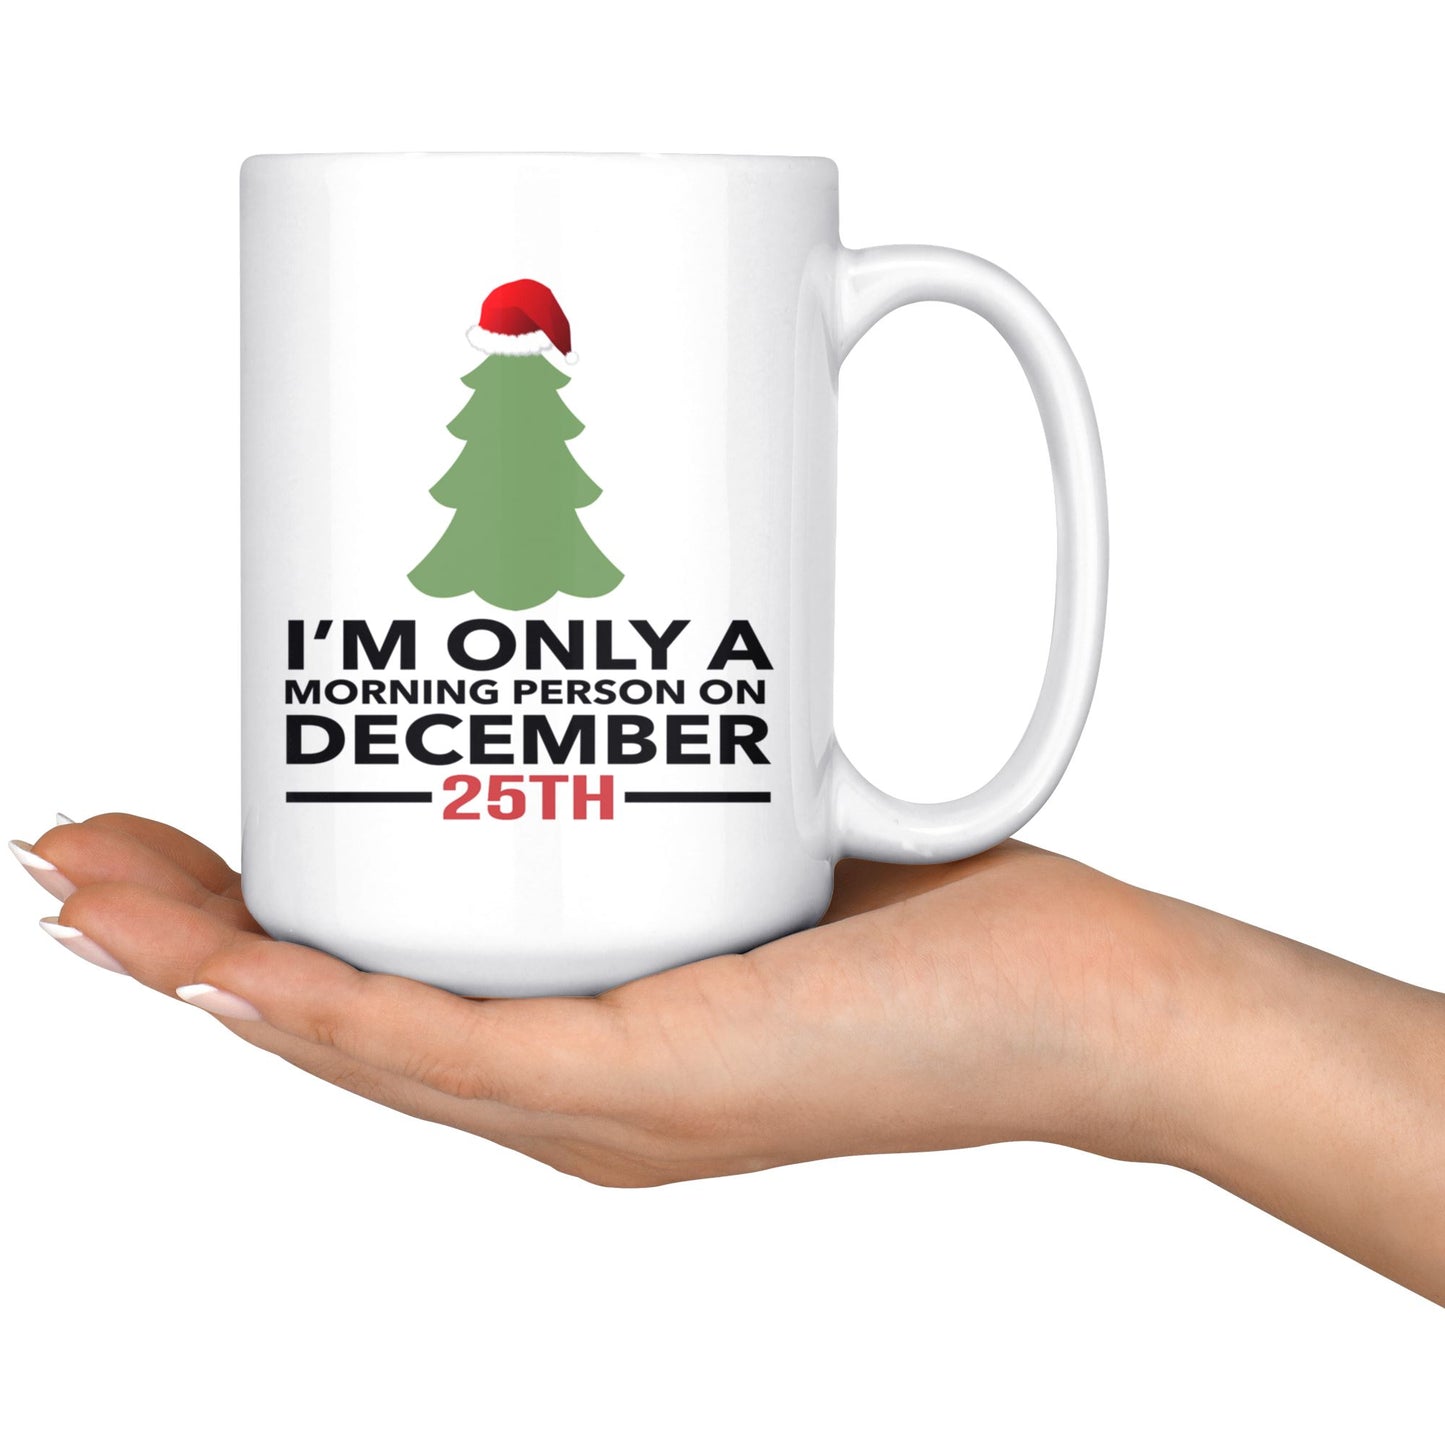 "I'm Only A Morning Person On December 25th" - Coffee Mug Drinkware 